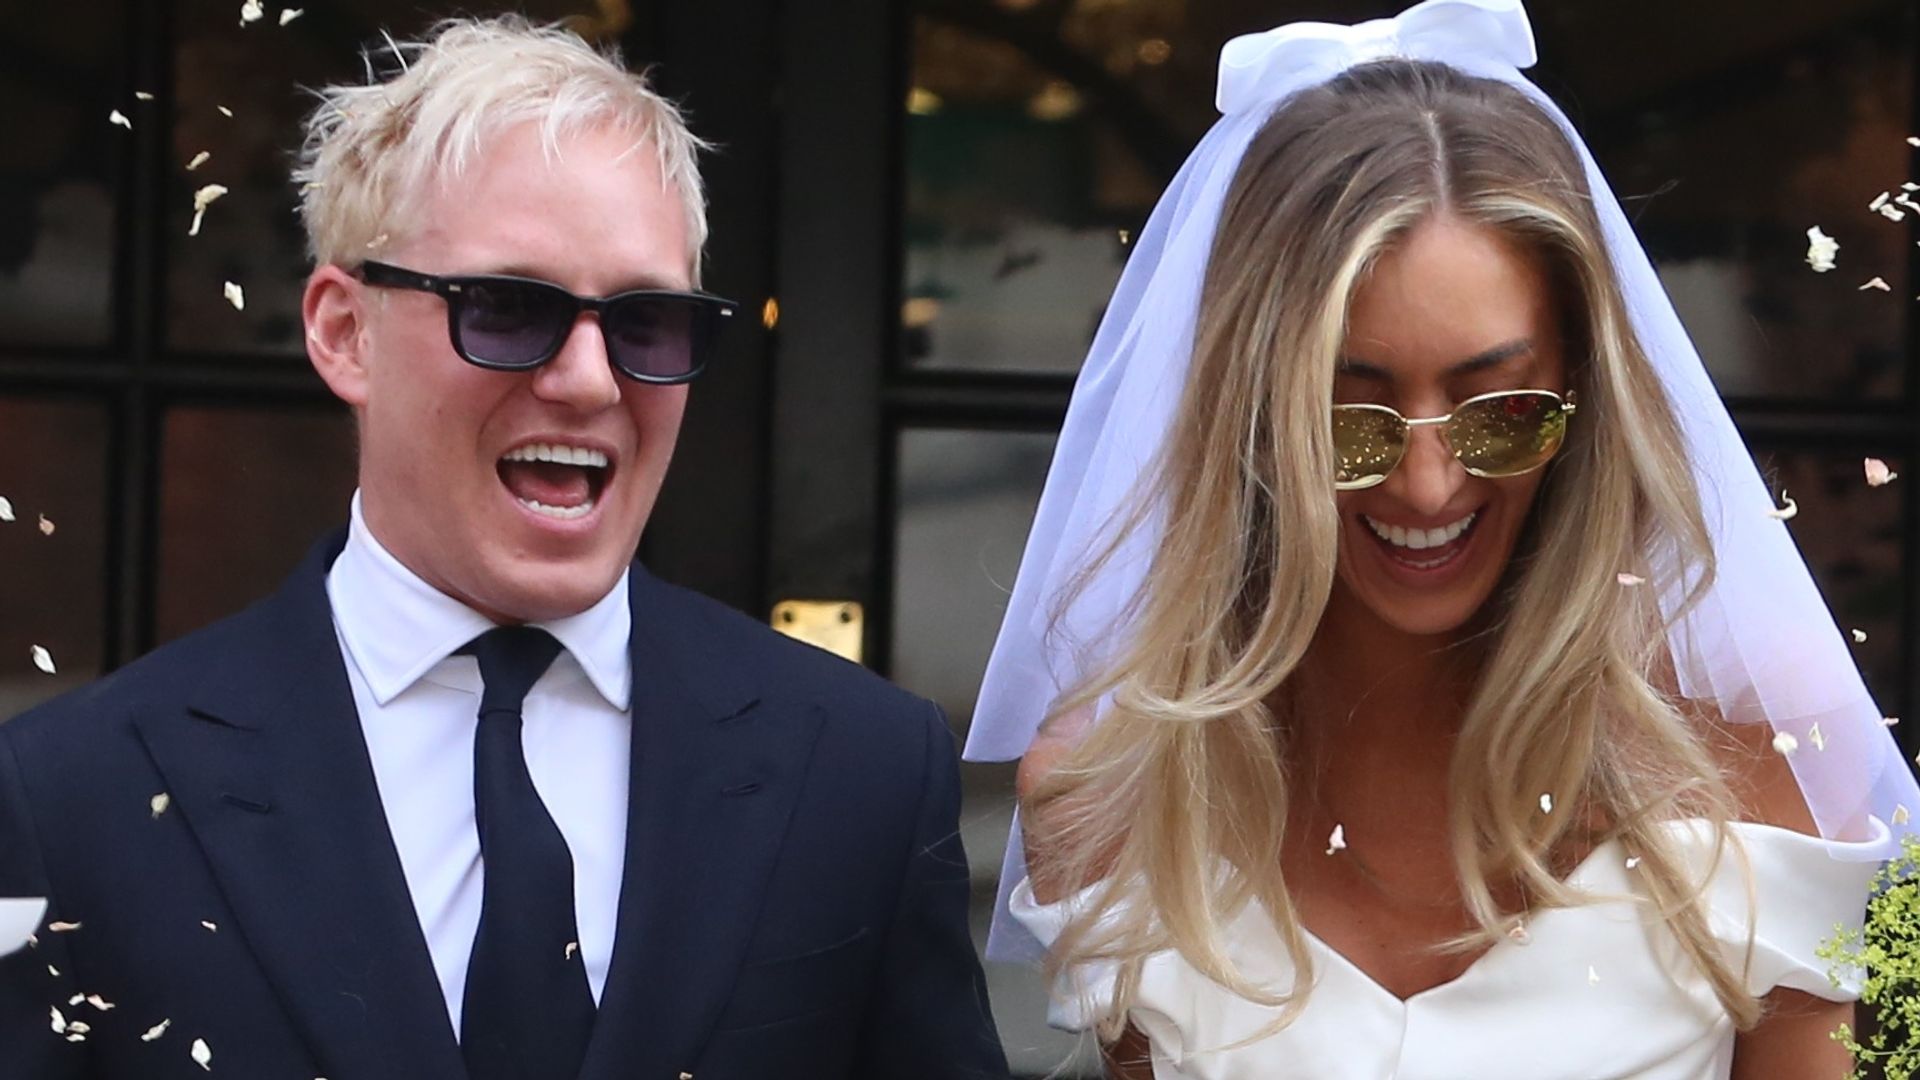 Newlyweds Jamie Laing and Sophie Habboo being showered with confetti at their Chelsea wedding